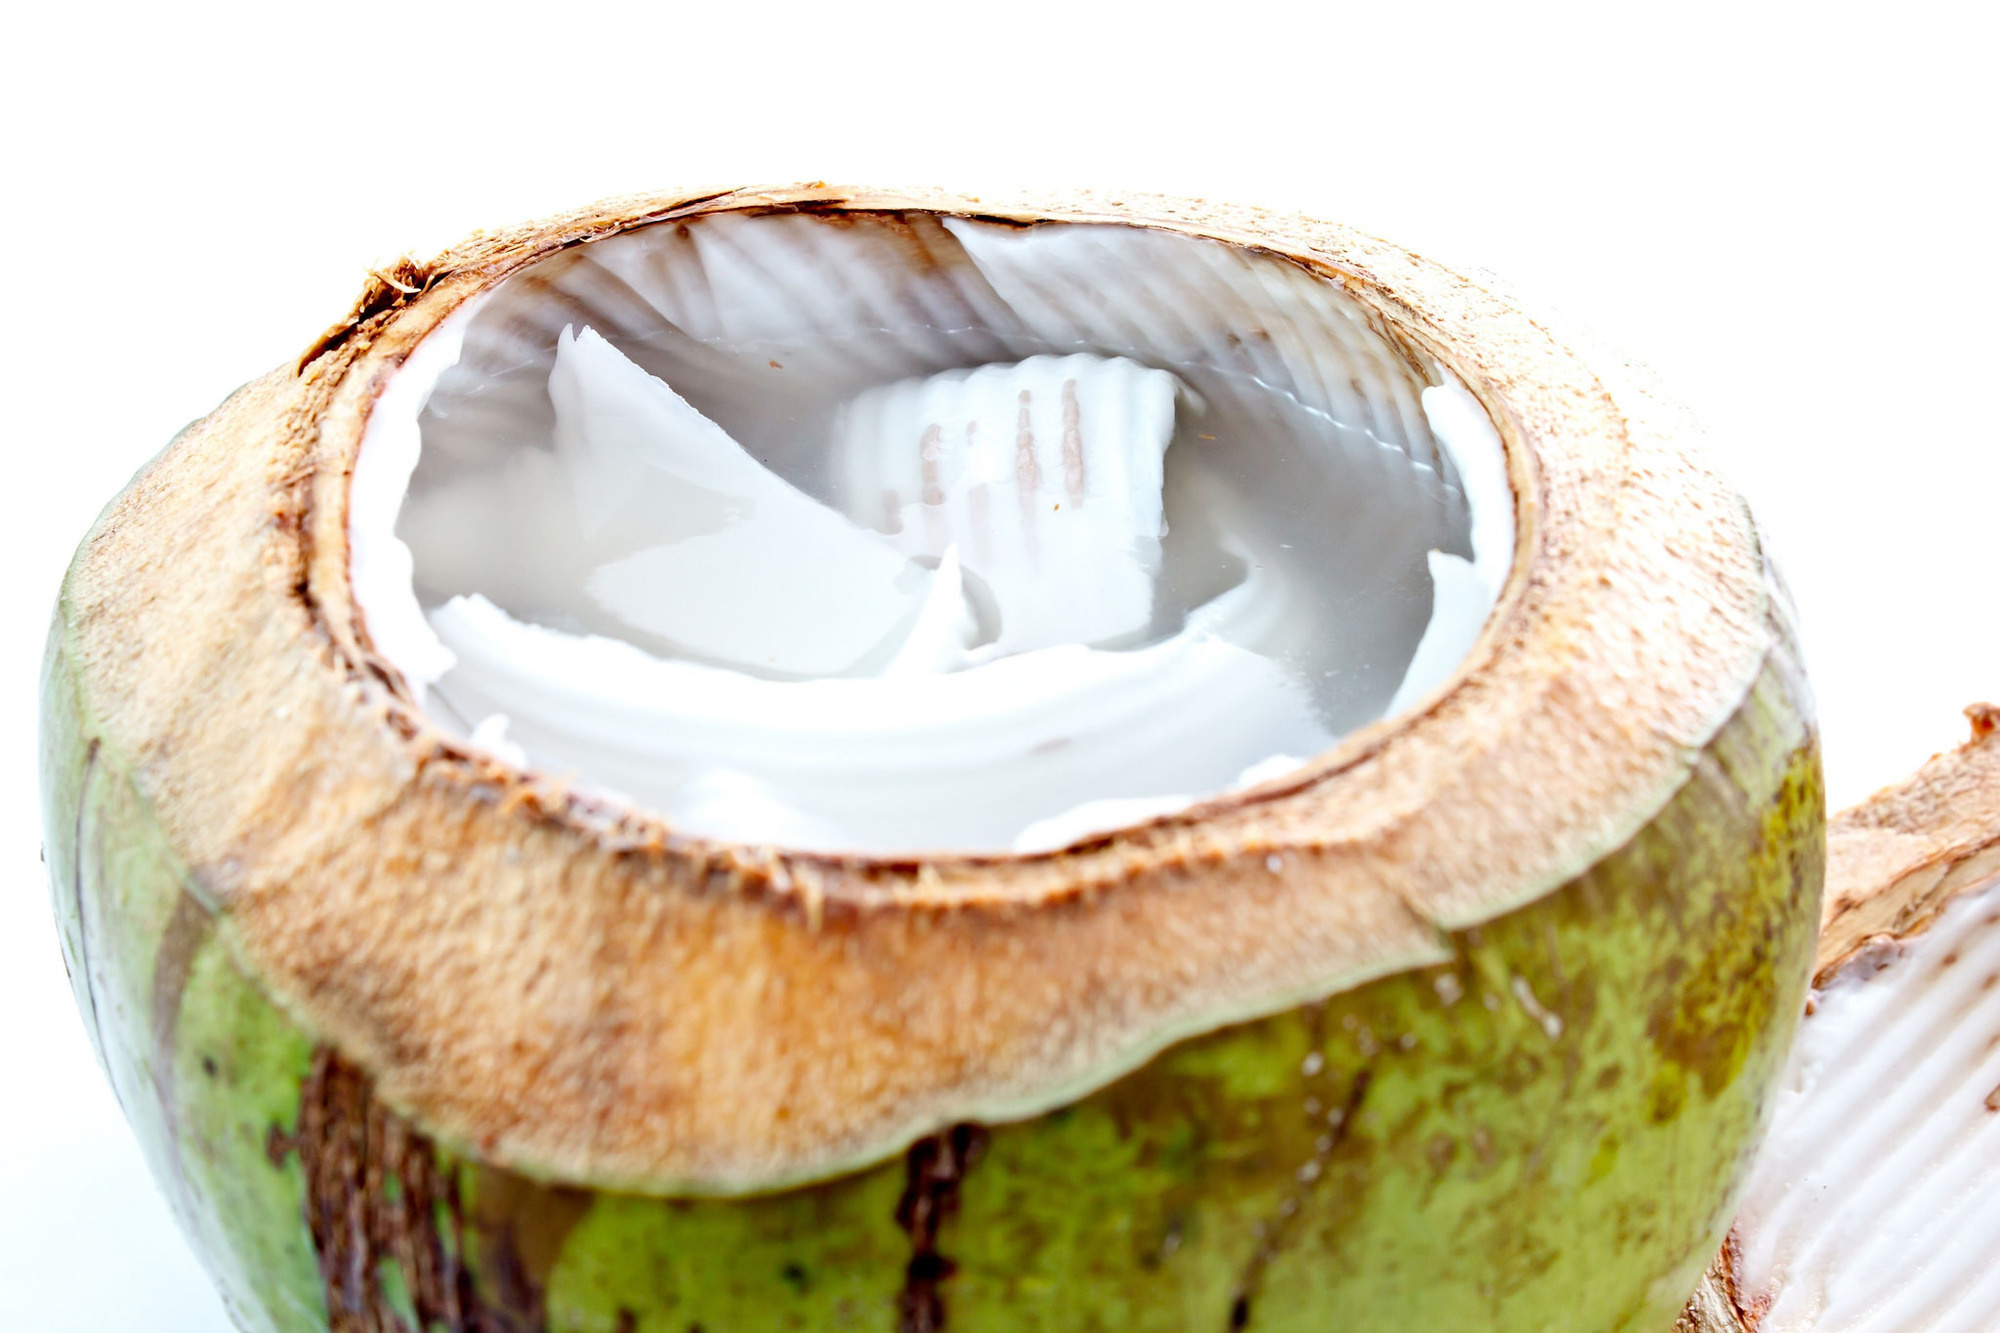 Coconut water is identical to blood plasma, and can therefore be used as a "universal donor." It was even used as an IV drip during World War II.